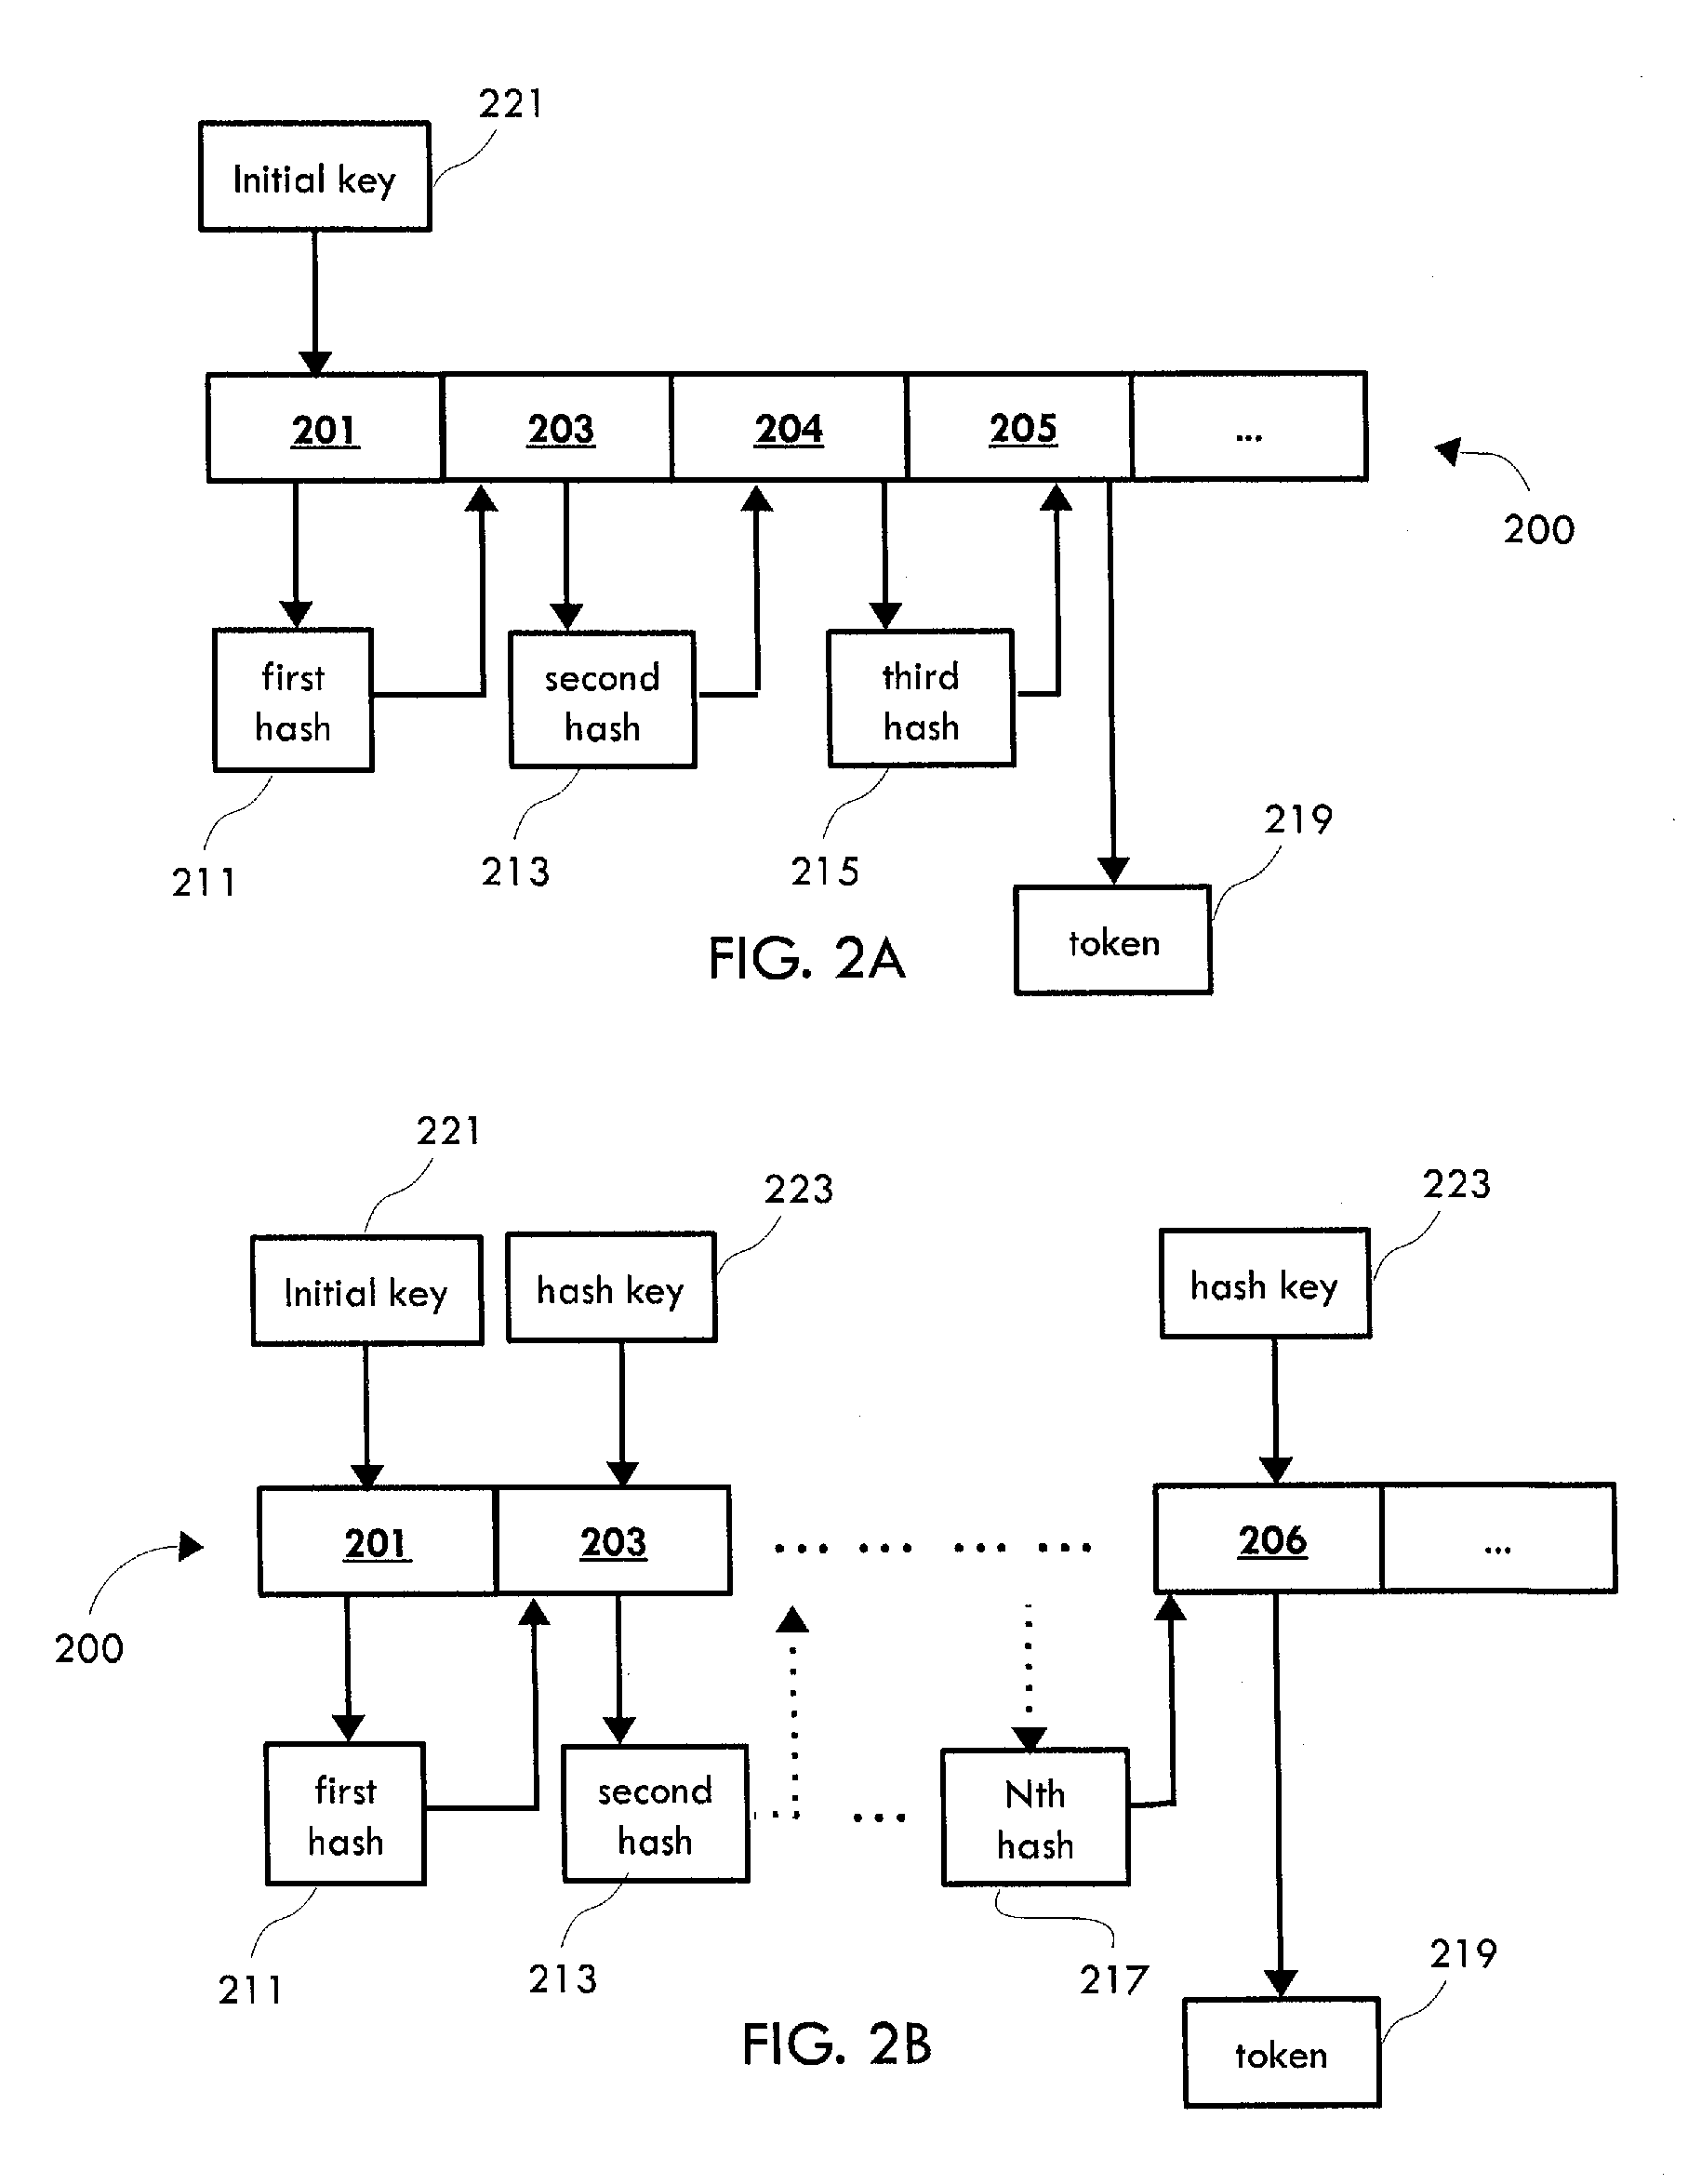 System and method for cascading token generation and data de-identification